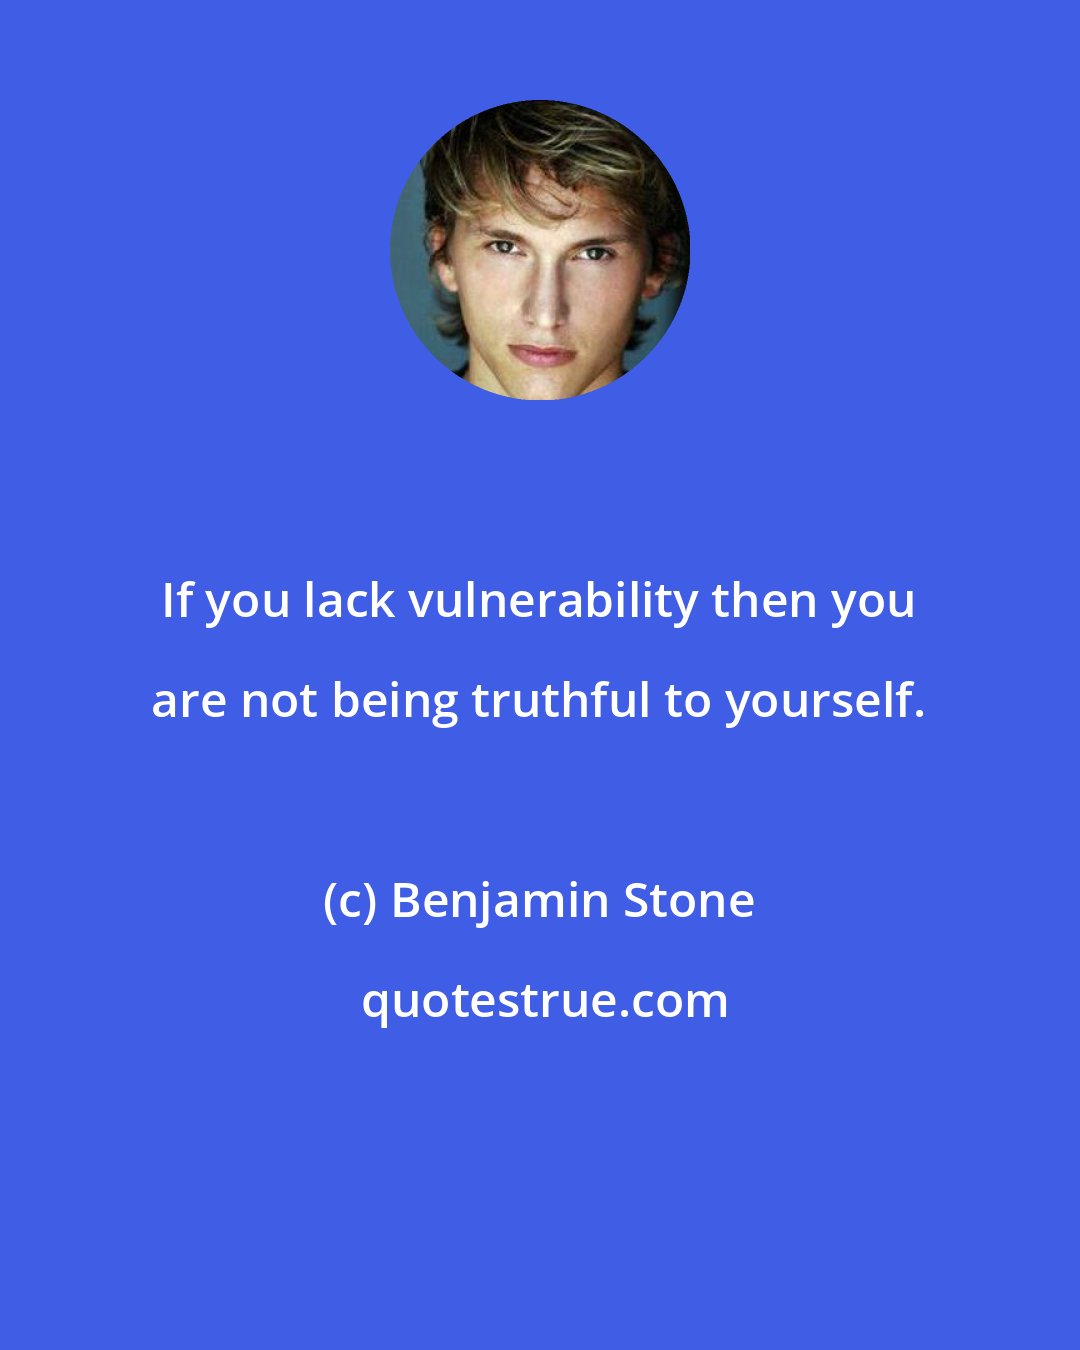 Benjamin Stone: If you lack vulnerability then you are not being truthful to yourself.